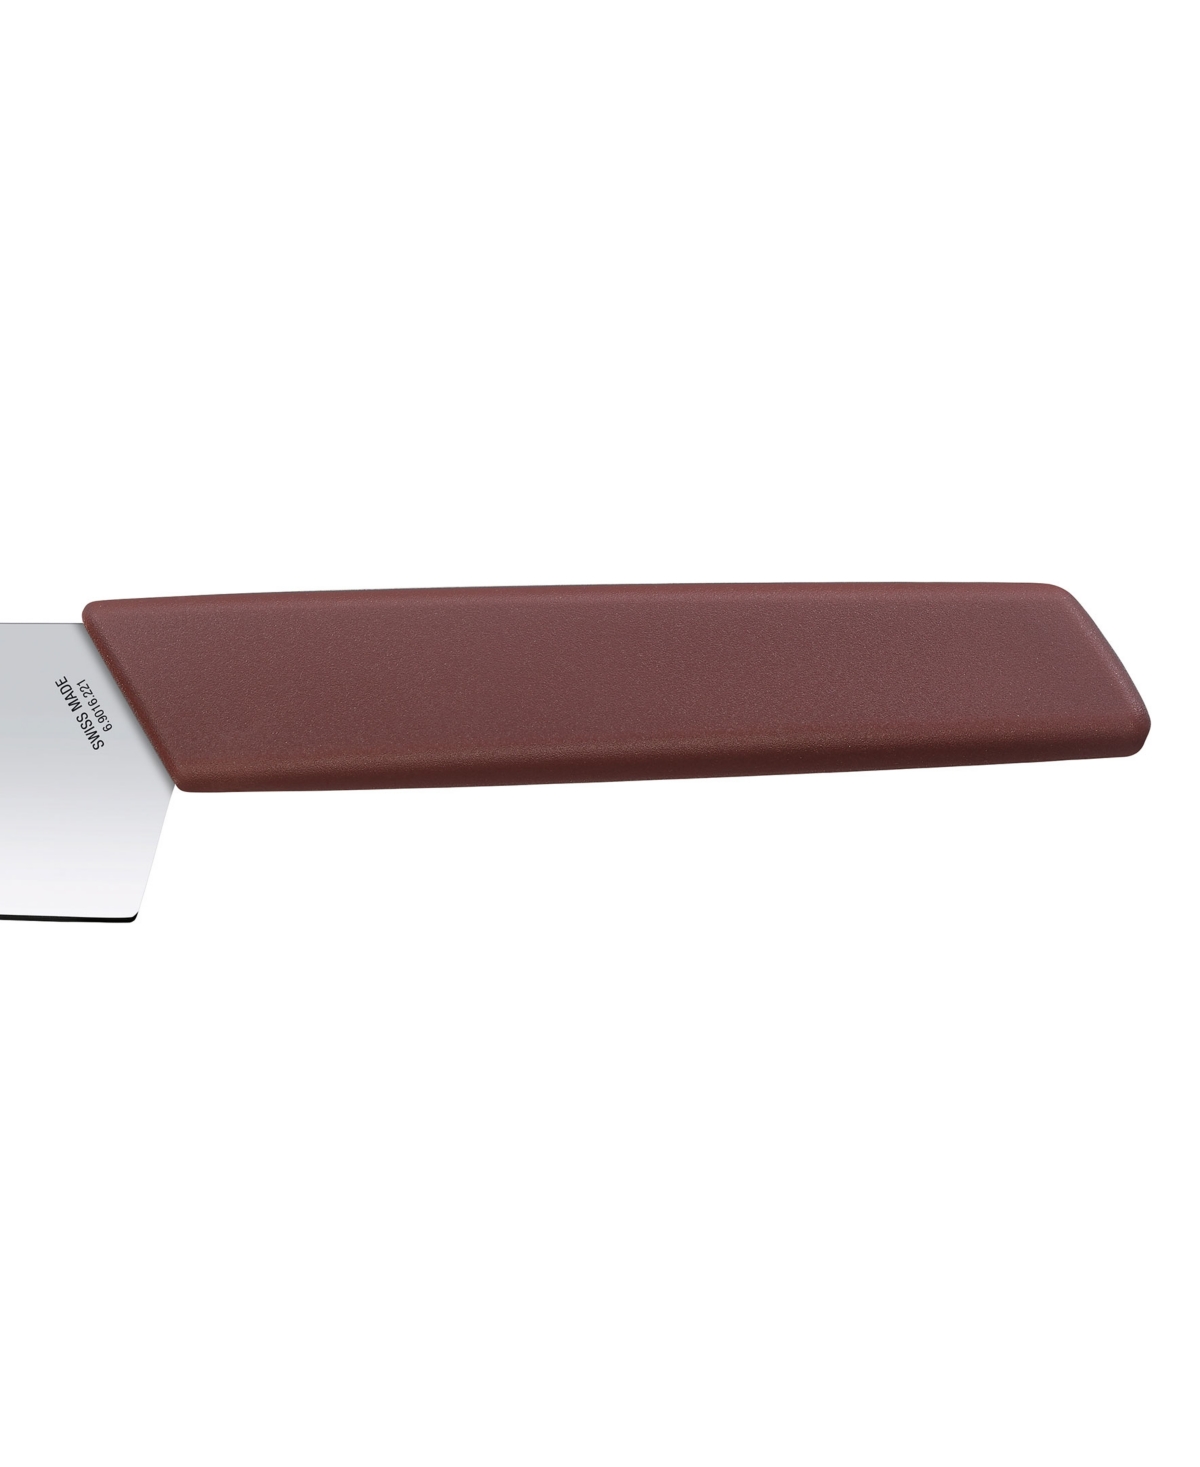 Shop Victorinox Stainless Steel 8.7" Carving Knife In Red